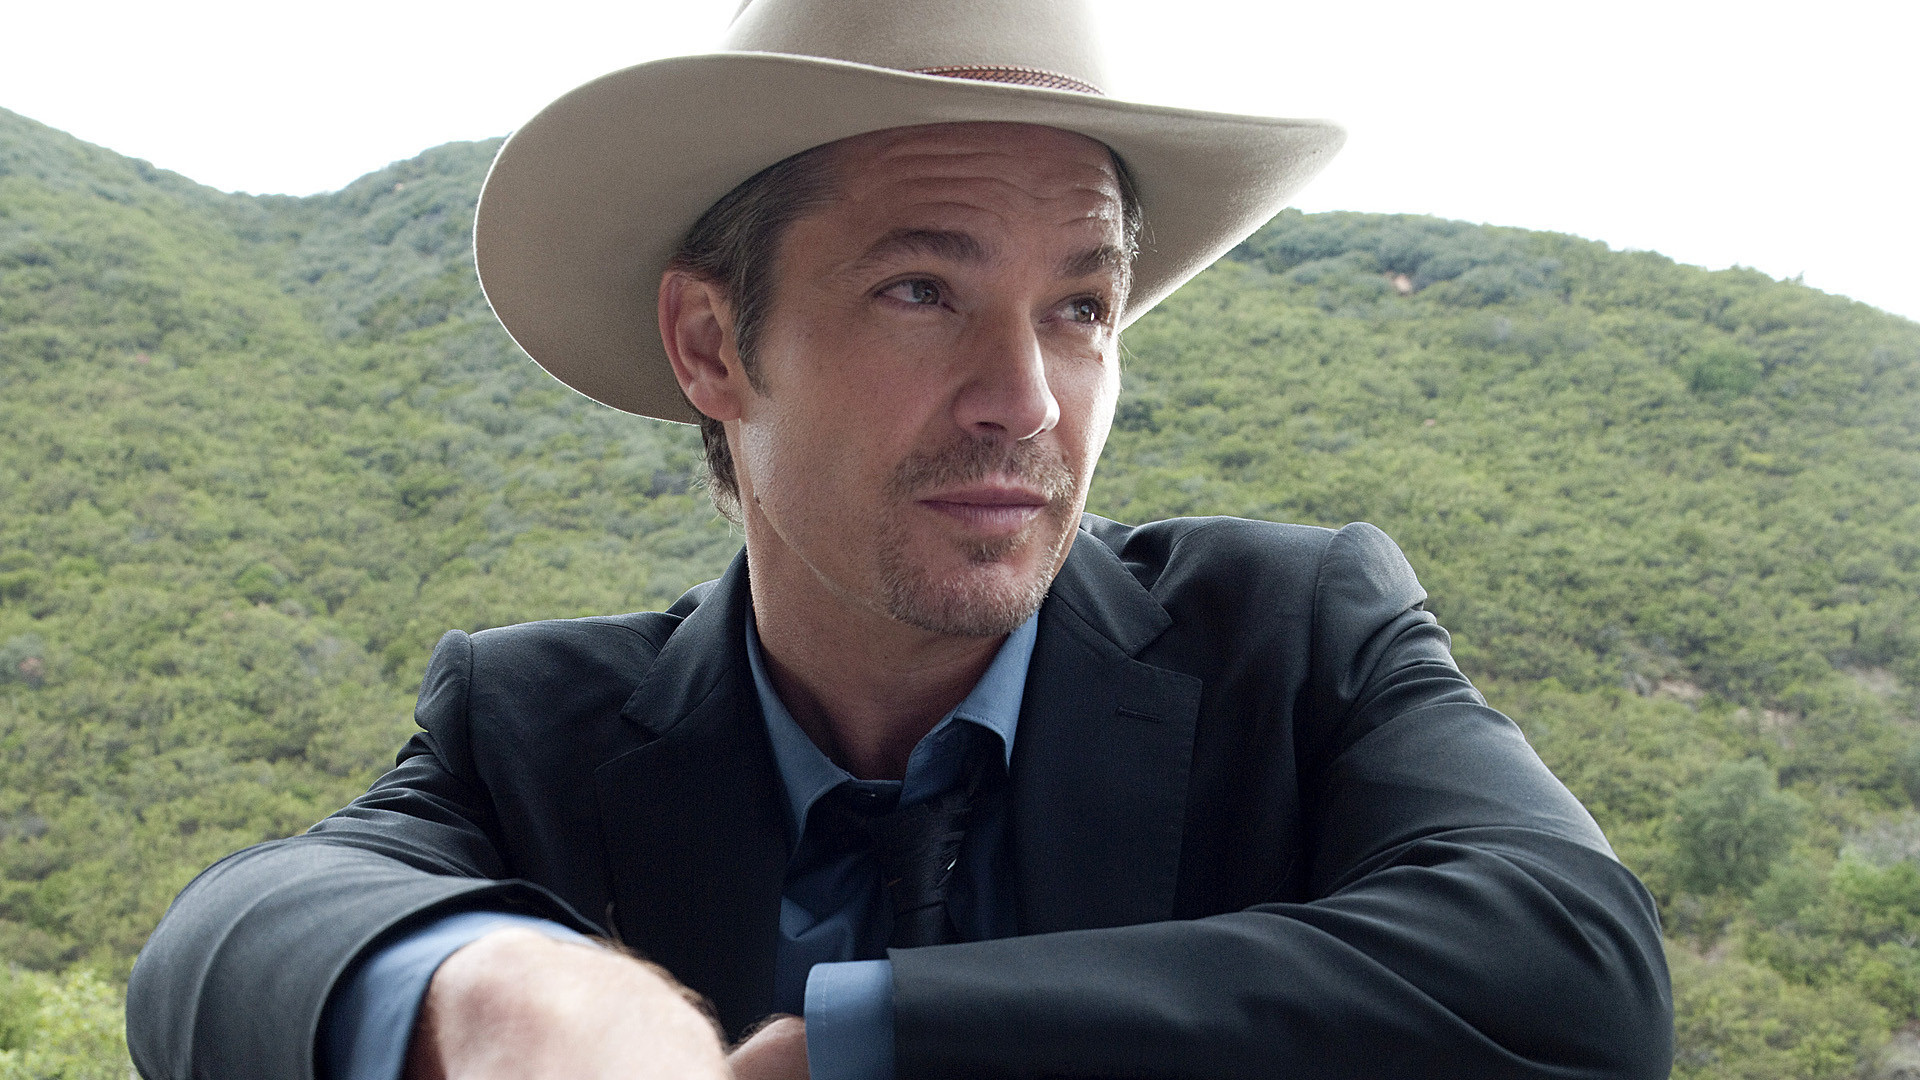 TV Show Justified HD Wallpaper | Background Image